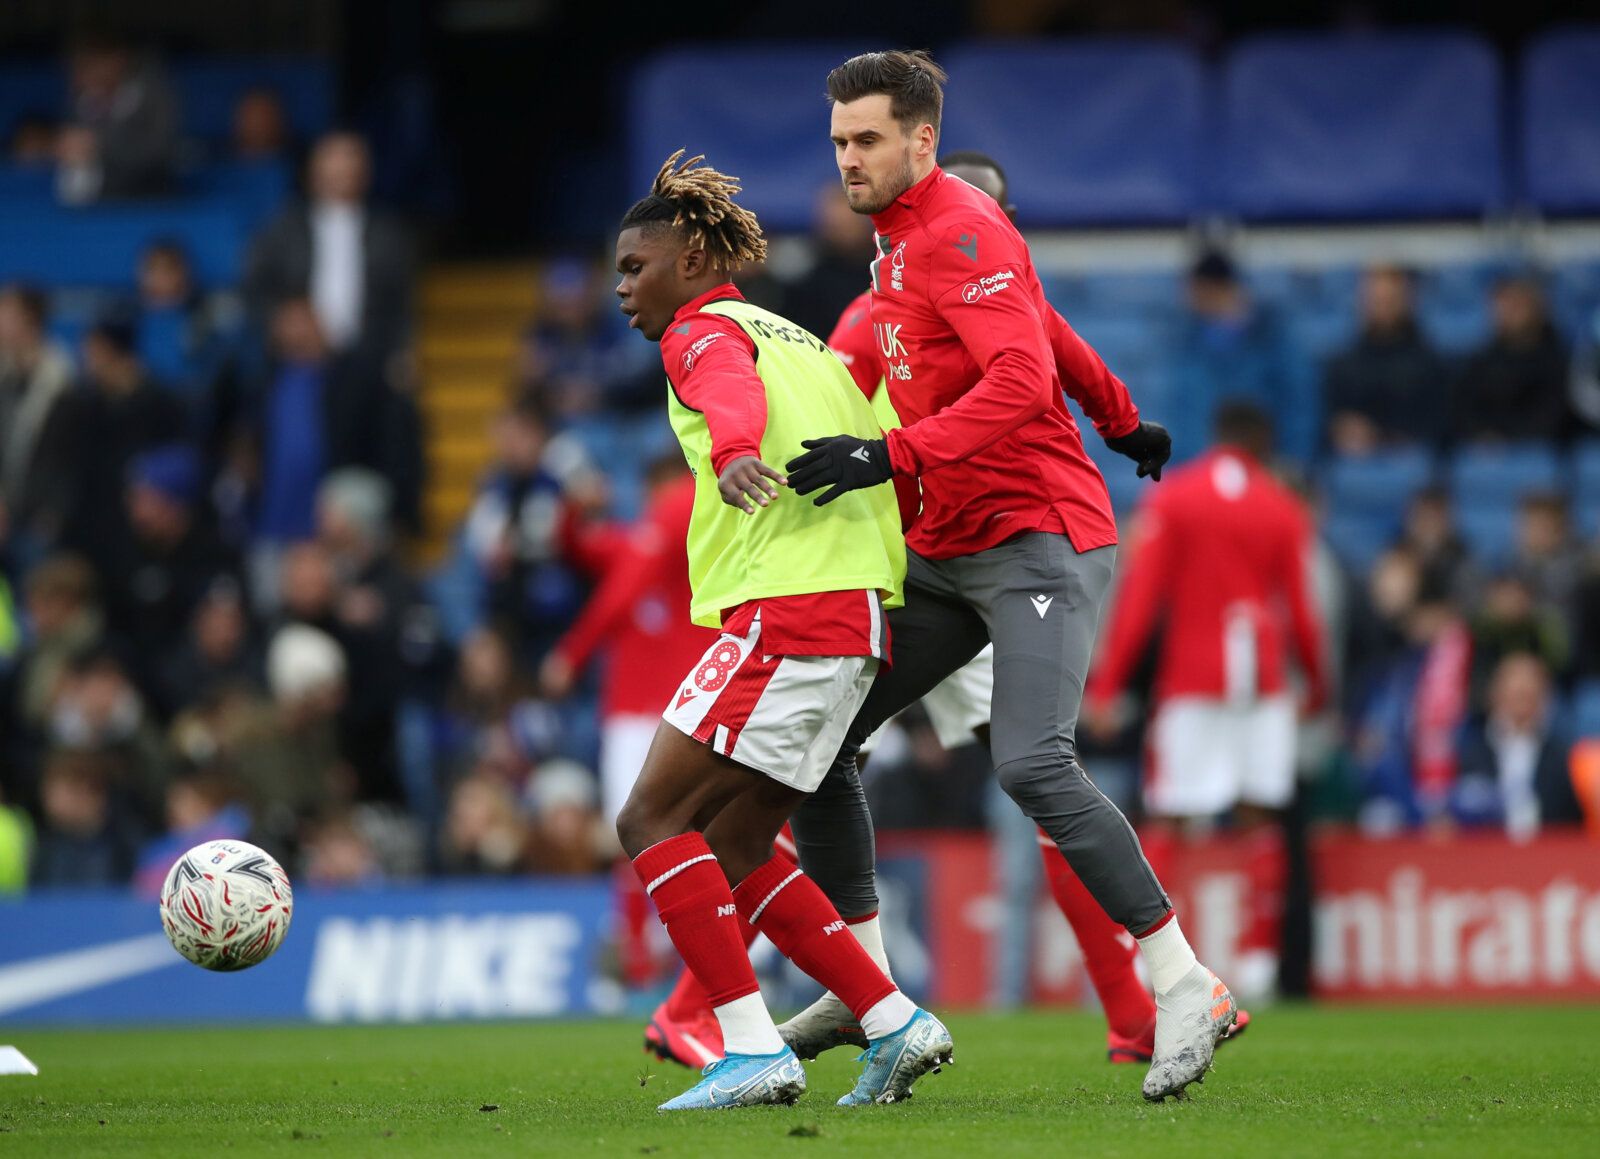 Soccer Football - FA Cup - Third Round - Chelsea v Nottingham Forest - Stamford Bridge, London, Britain - January 5, 2020  Nottingham Forest's Alex Mighten and Carl Jenkinson during the warm up before the match    REUTERS/David Klein